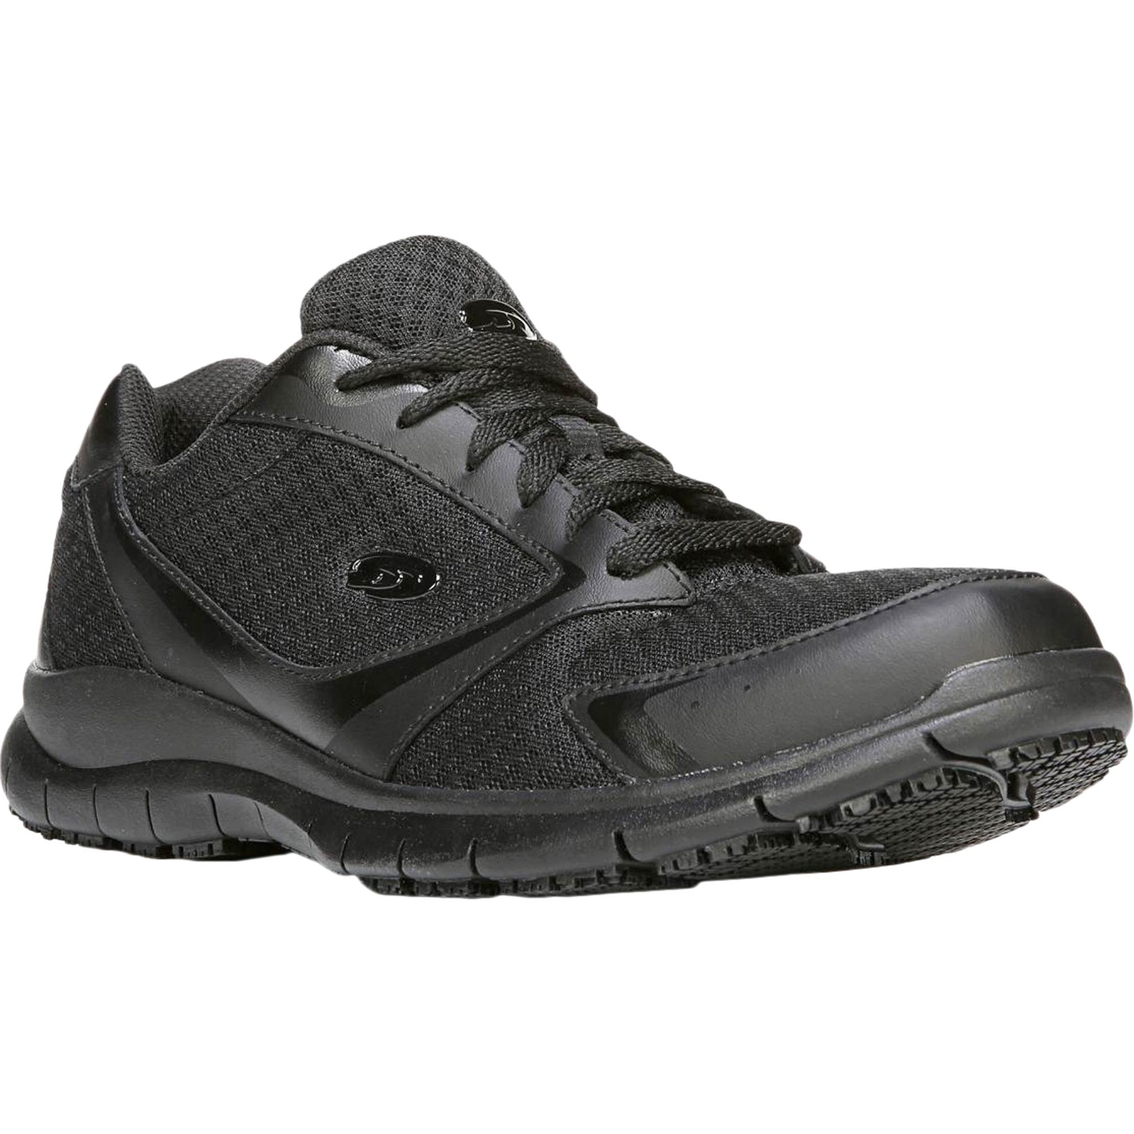 Dr. Scholl's Turbo Athletic Work Shoes | Casuals | Shoes | Shop The ...